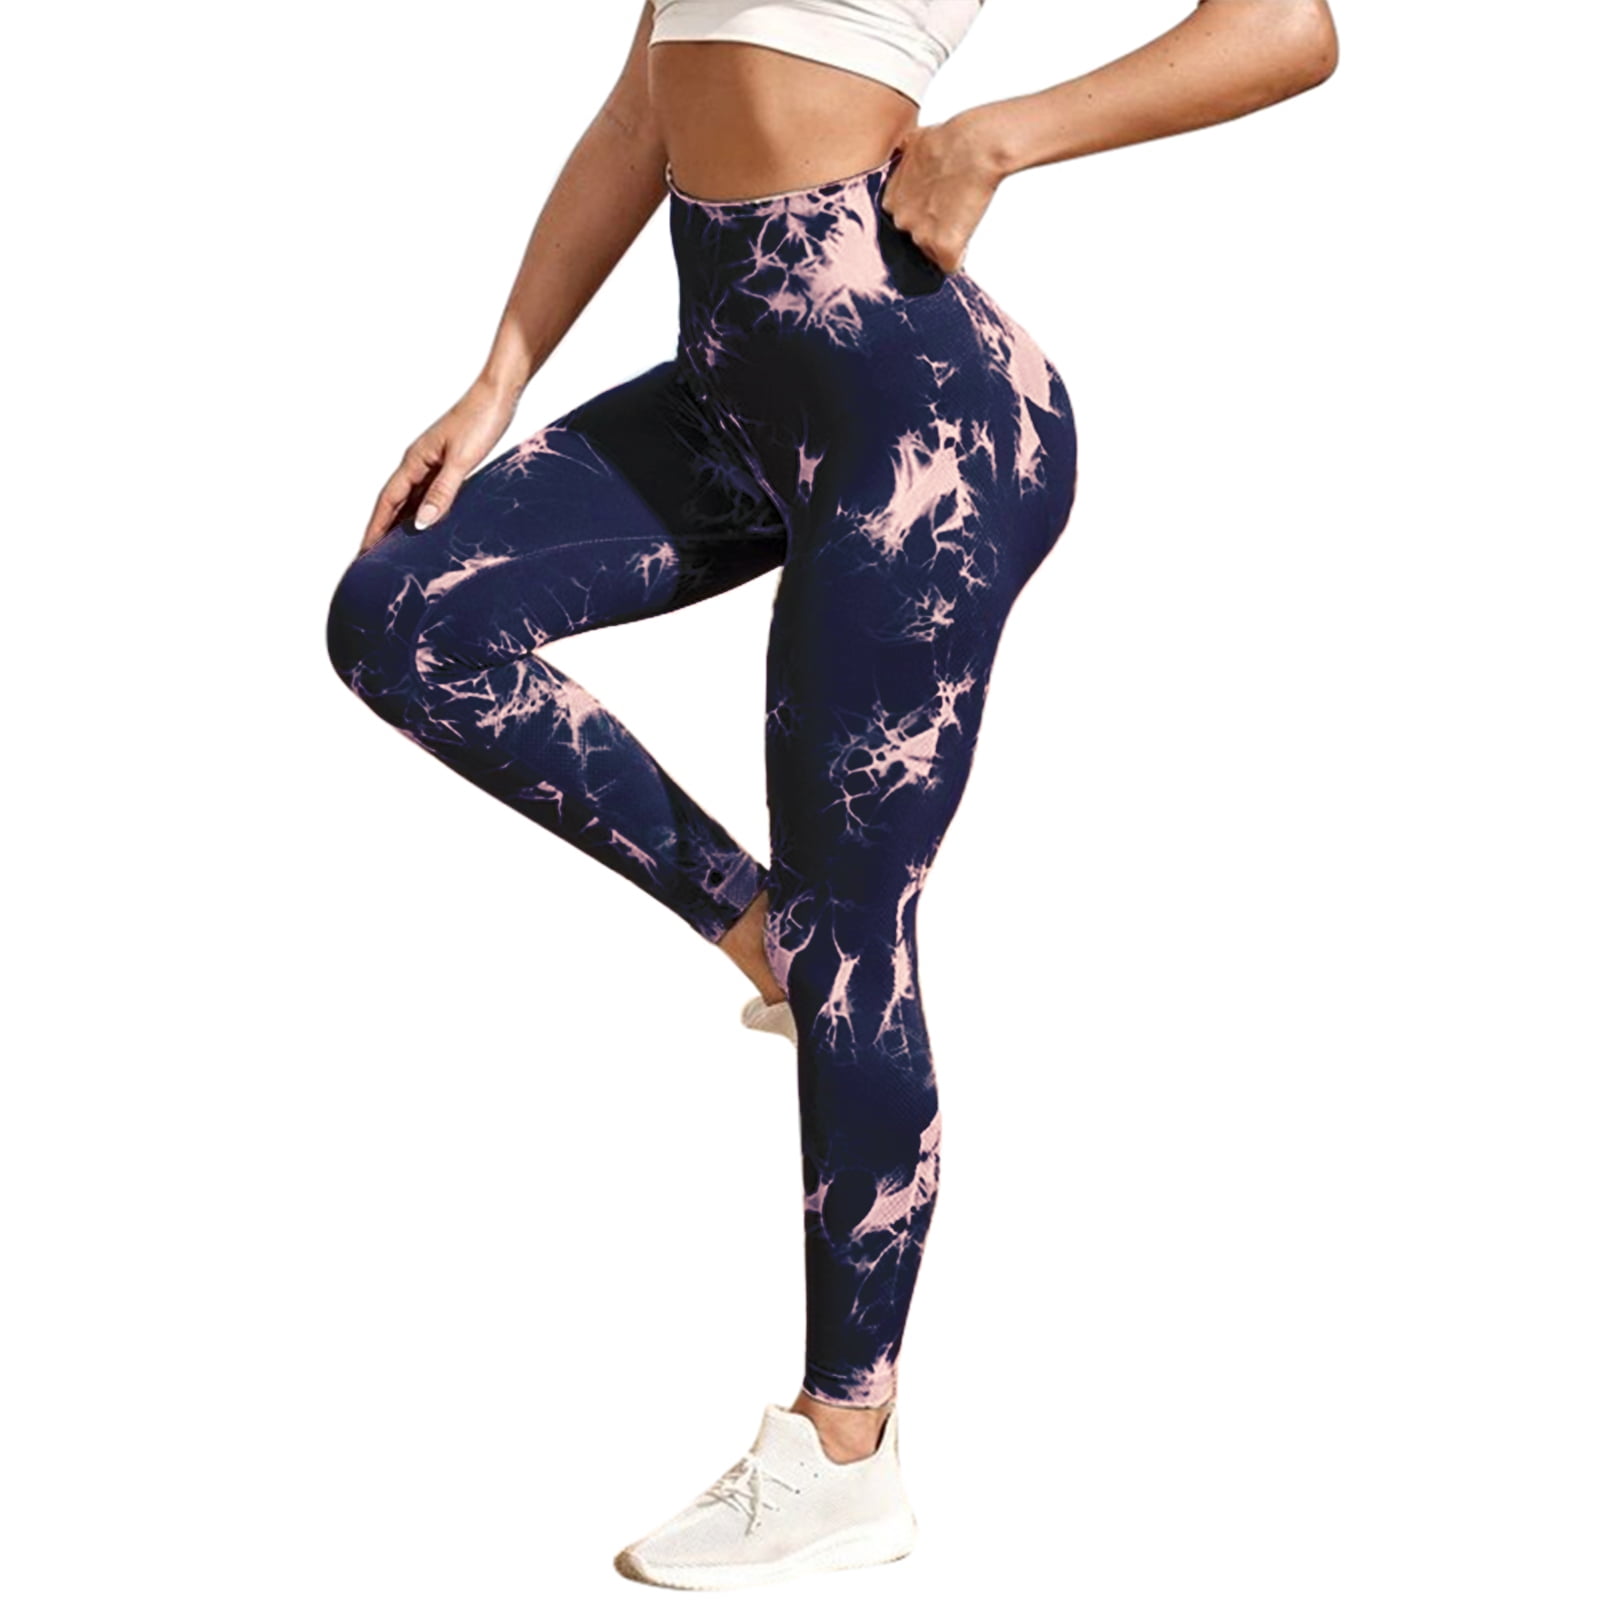 SeeMyLeggings - This one is for the galaxy lovers out there❤️ Shop here:  https://bit.ly/3jWwBFL #Leggings #seemyleggings #gymleggings # workoutleggings | Facebook